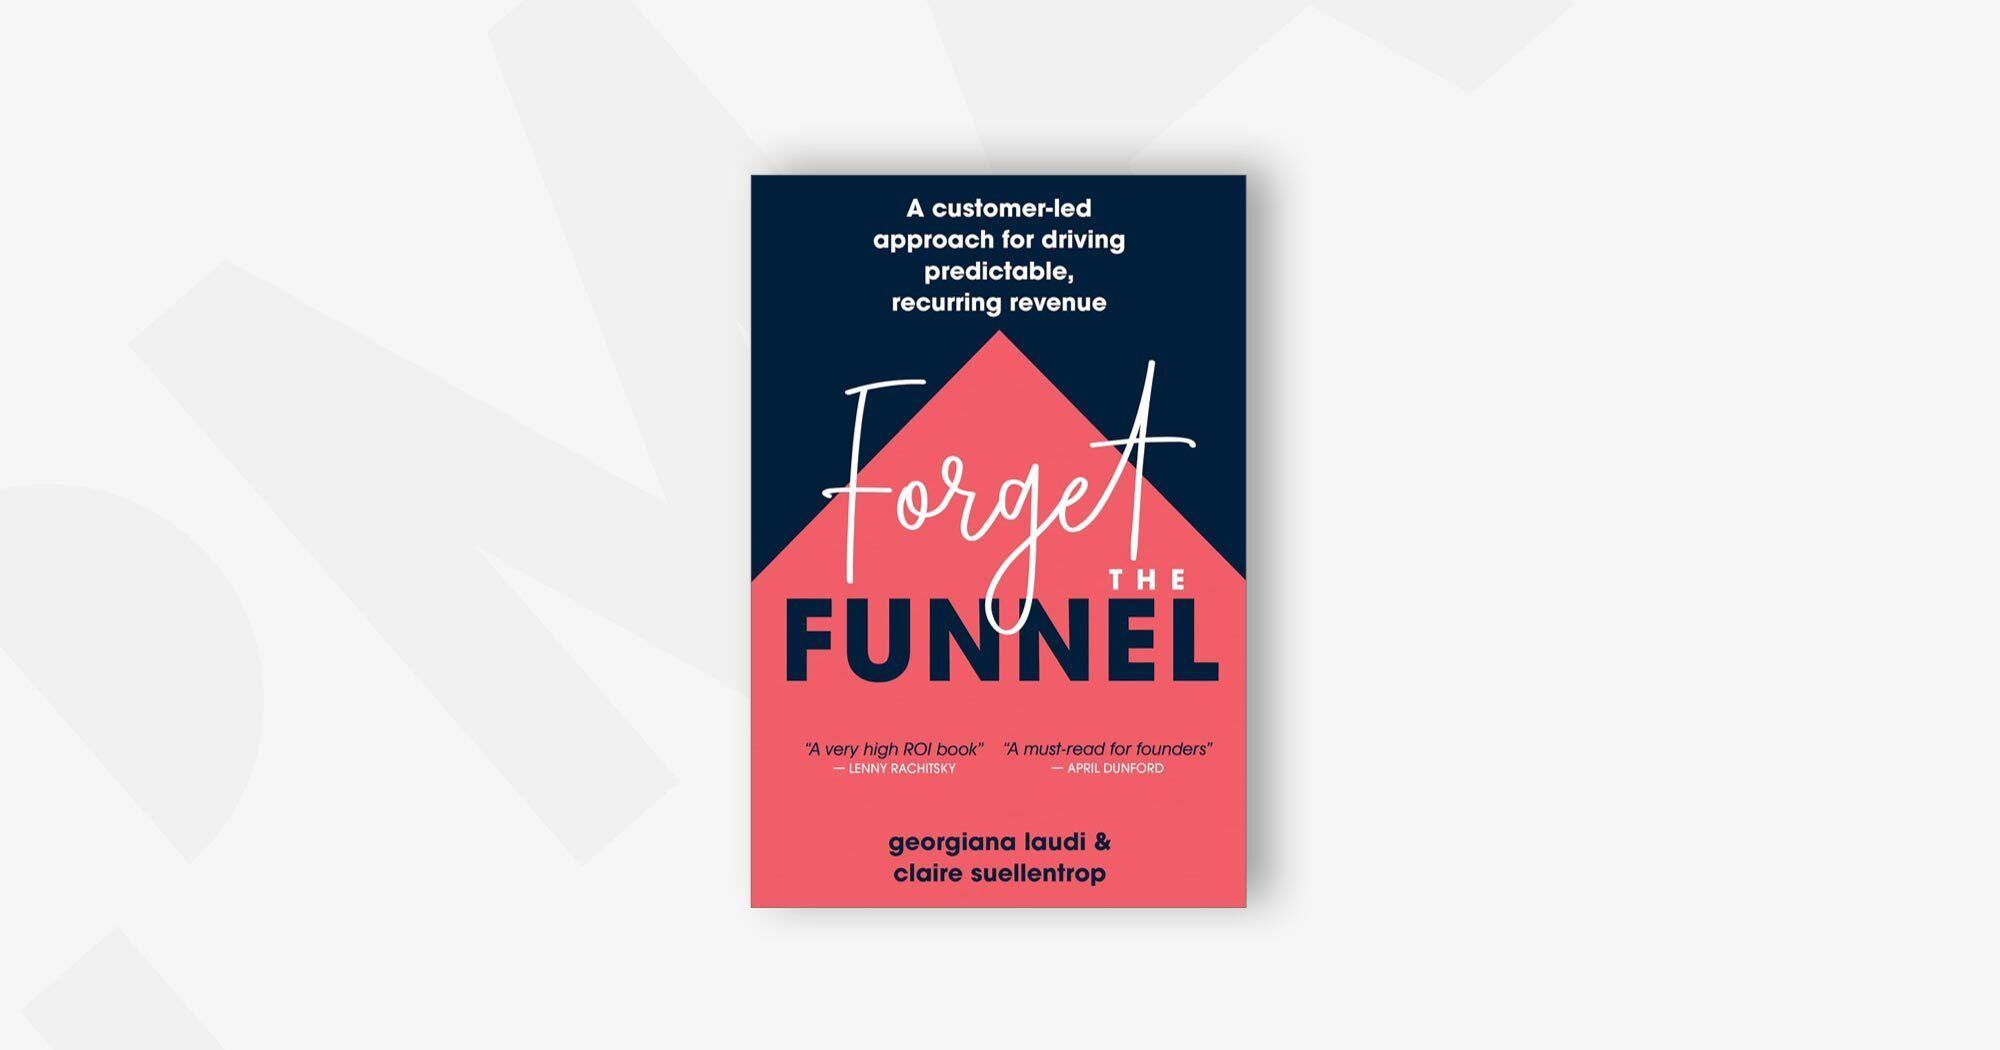 Forget the Funnel: A Customer-Led Approach for Driving Predictable, Recurring Revenue – Georgiana Laudi and Claire Suellentrop